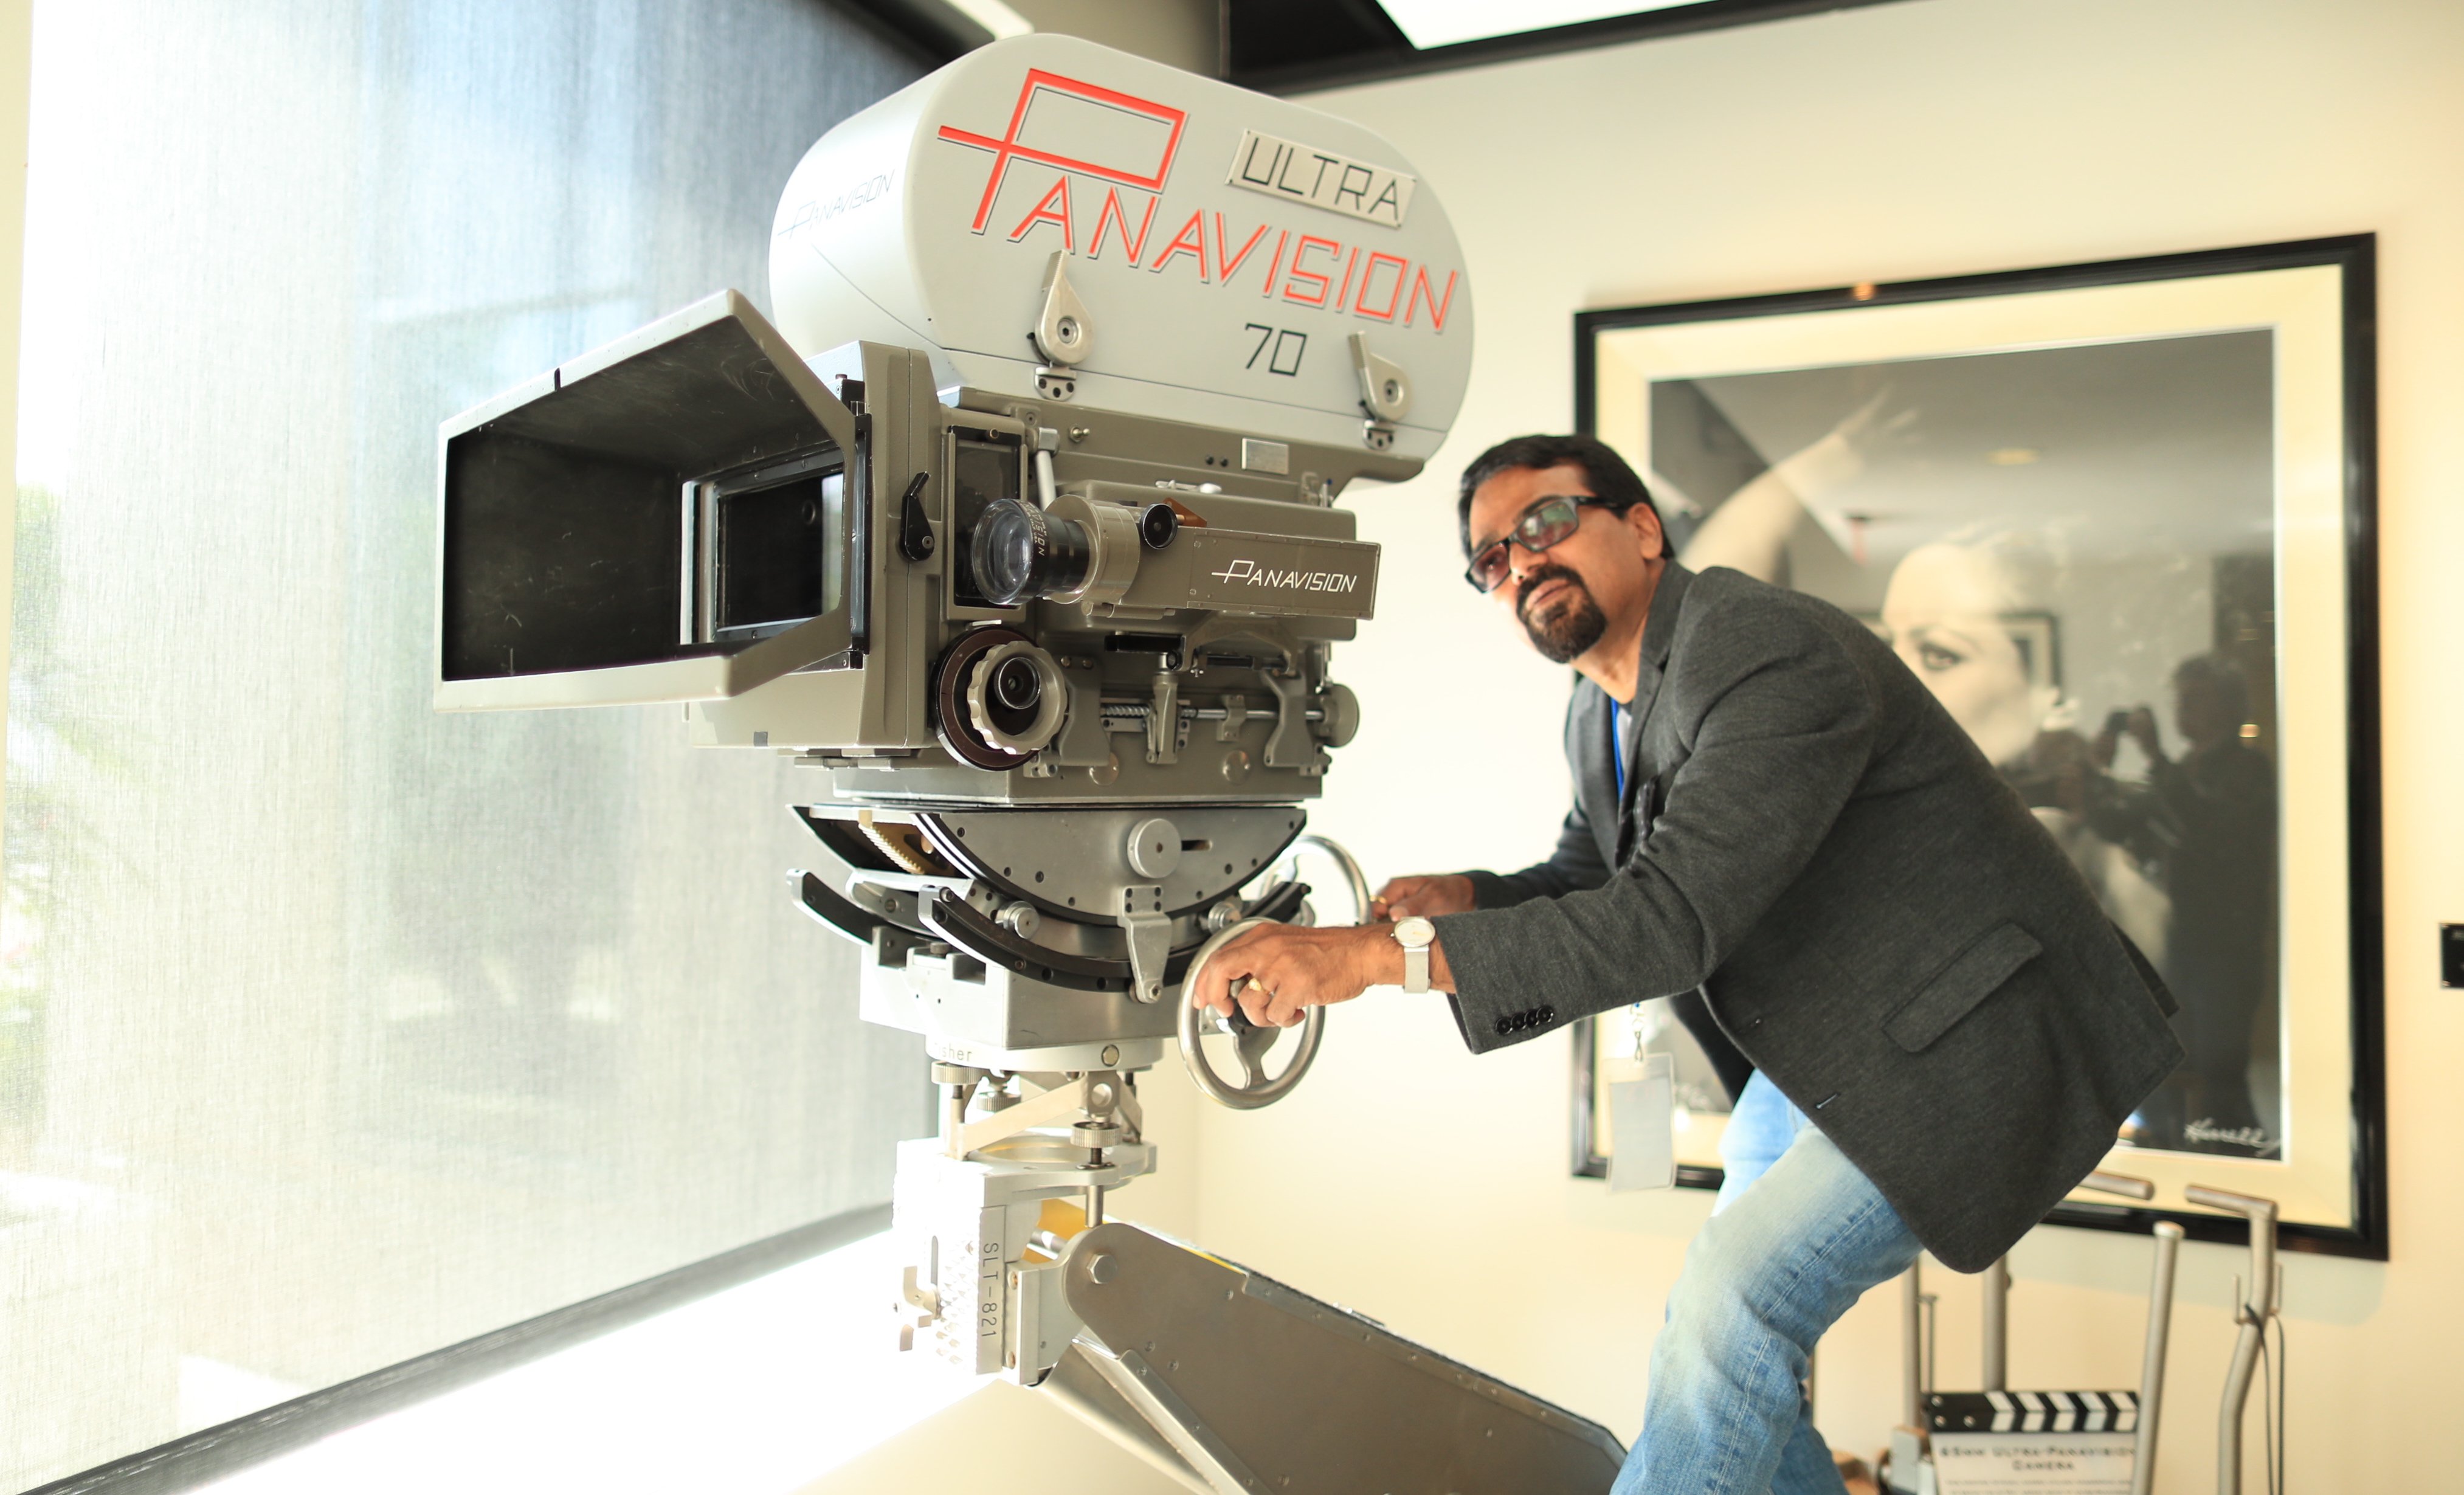 The Ultra Panavision 70 camera did not fail to impress. Photo by James Neihouse, ASC